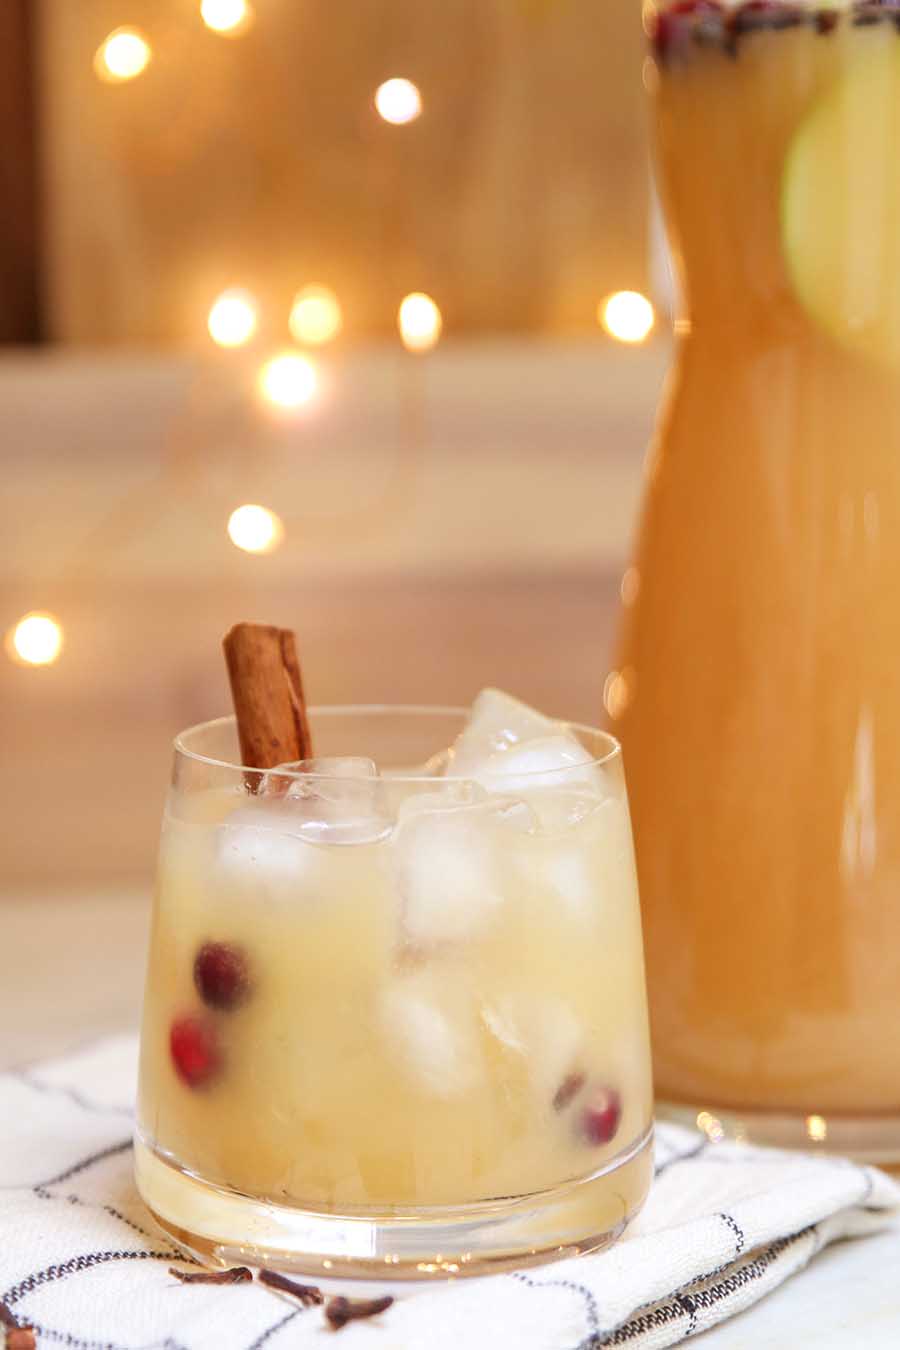 Spiced Spicy Pear Drink. Here are 10 Non-Alcohol Summer Drinks that you'll love. Need some recipes this summer, well, we have you covered if you need slushies, teas, fruit drinks and more. These bloggers have tested them, and these are their favorites. #drinks #summerdrinks #cocktail #drinkrecipes #recipes #happyhour #weddings #weddingdrinks